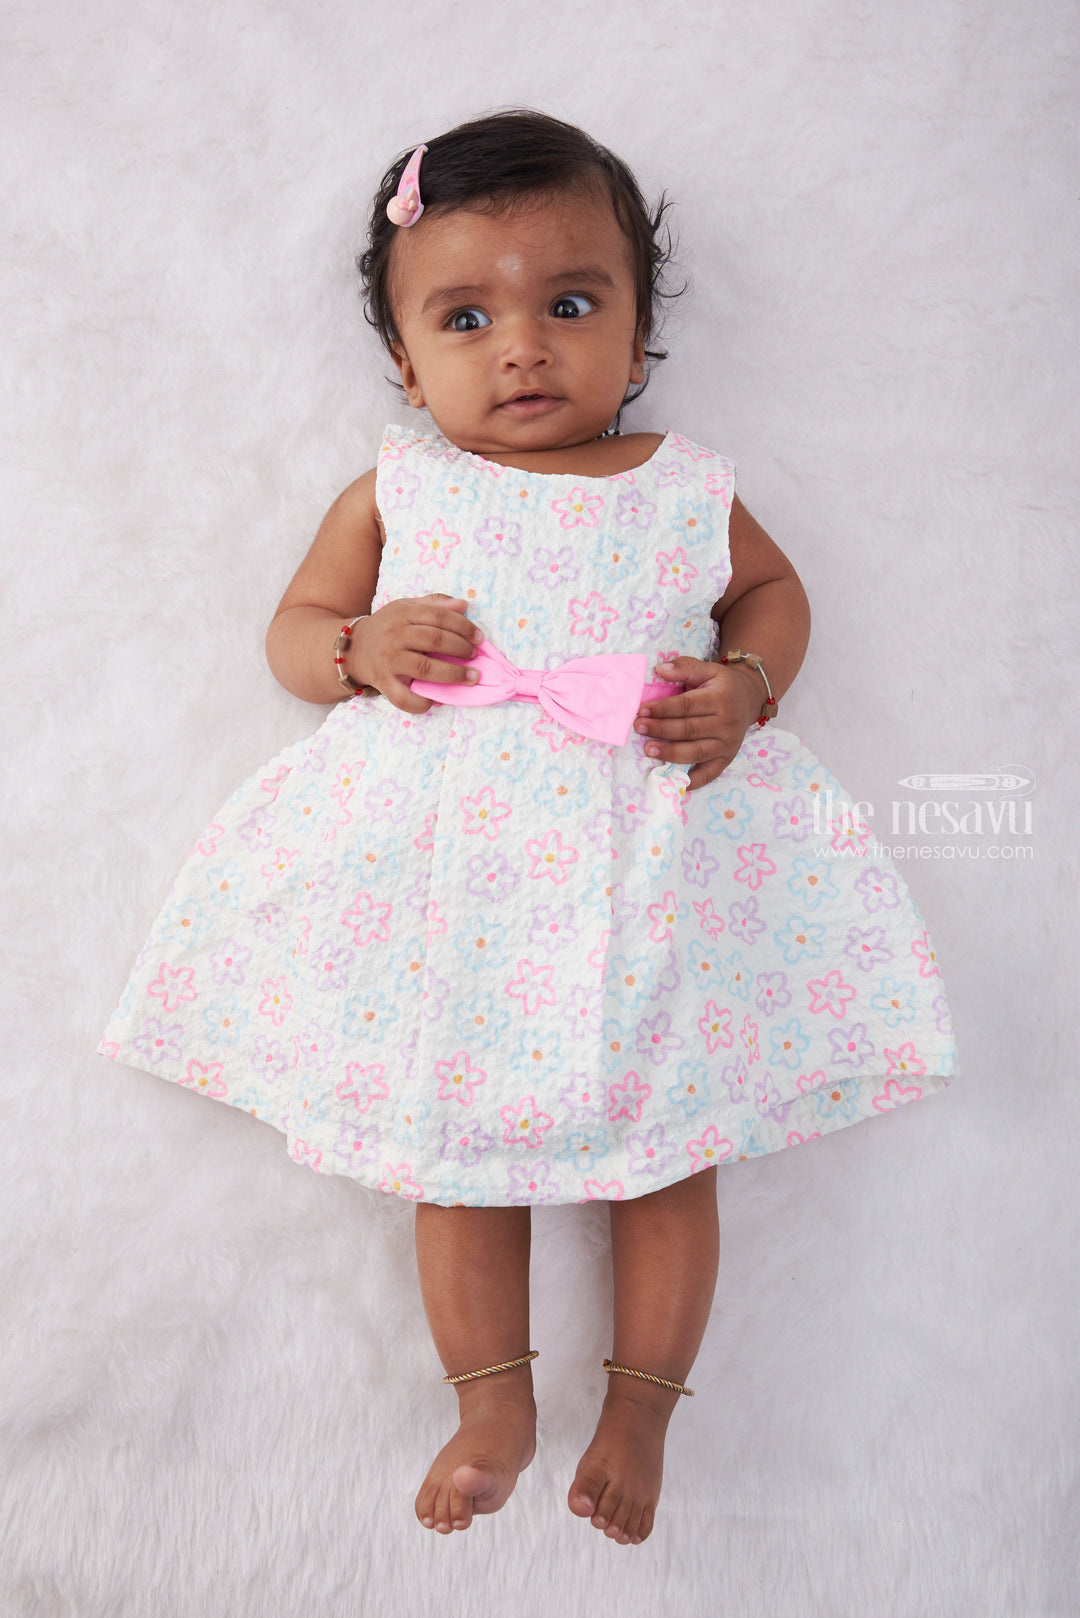 The Nesavu Baby Fancy Frock Pink-White Designer Lucknow Chikan Dress for Babies Nesavu 14 (6M) / multicolor BFJ439A-14 New Born Baby Frock Online | Floral Pink Baby Frock | The Nesavu